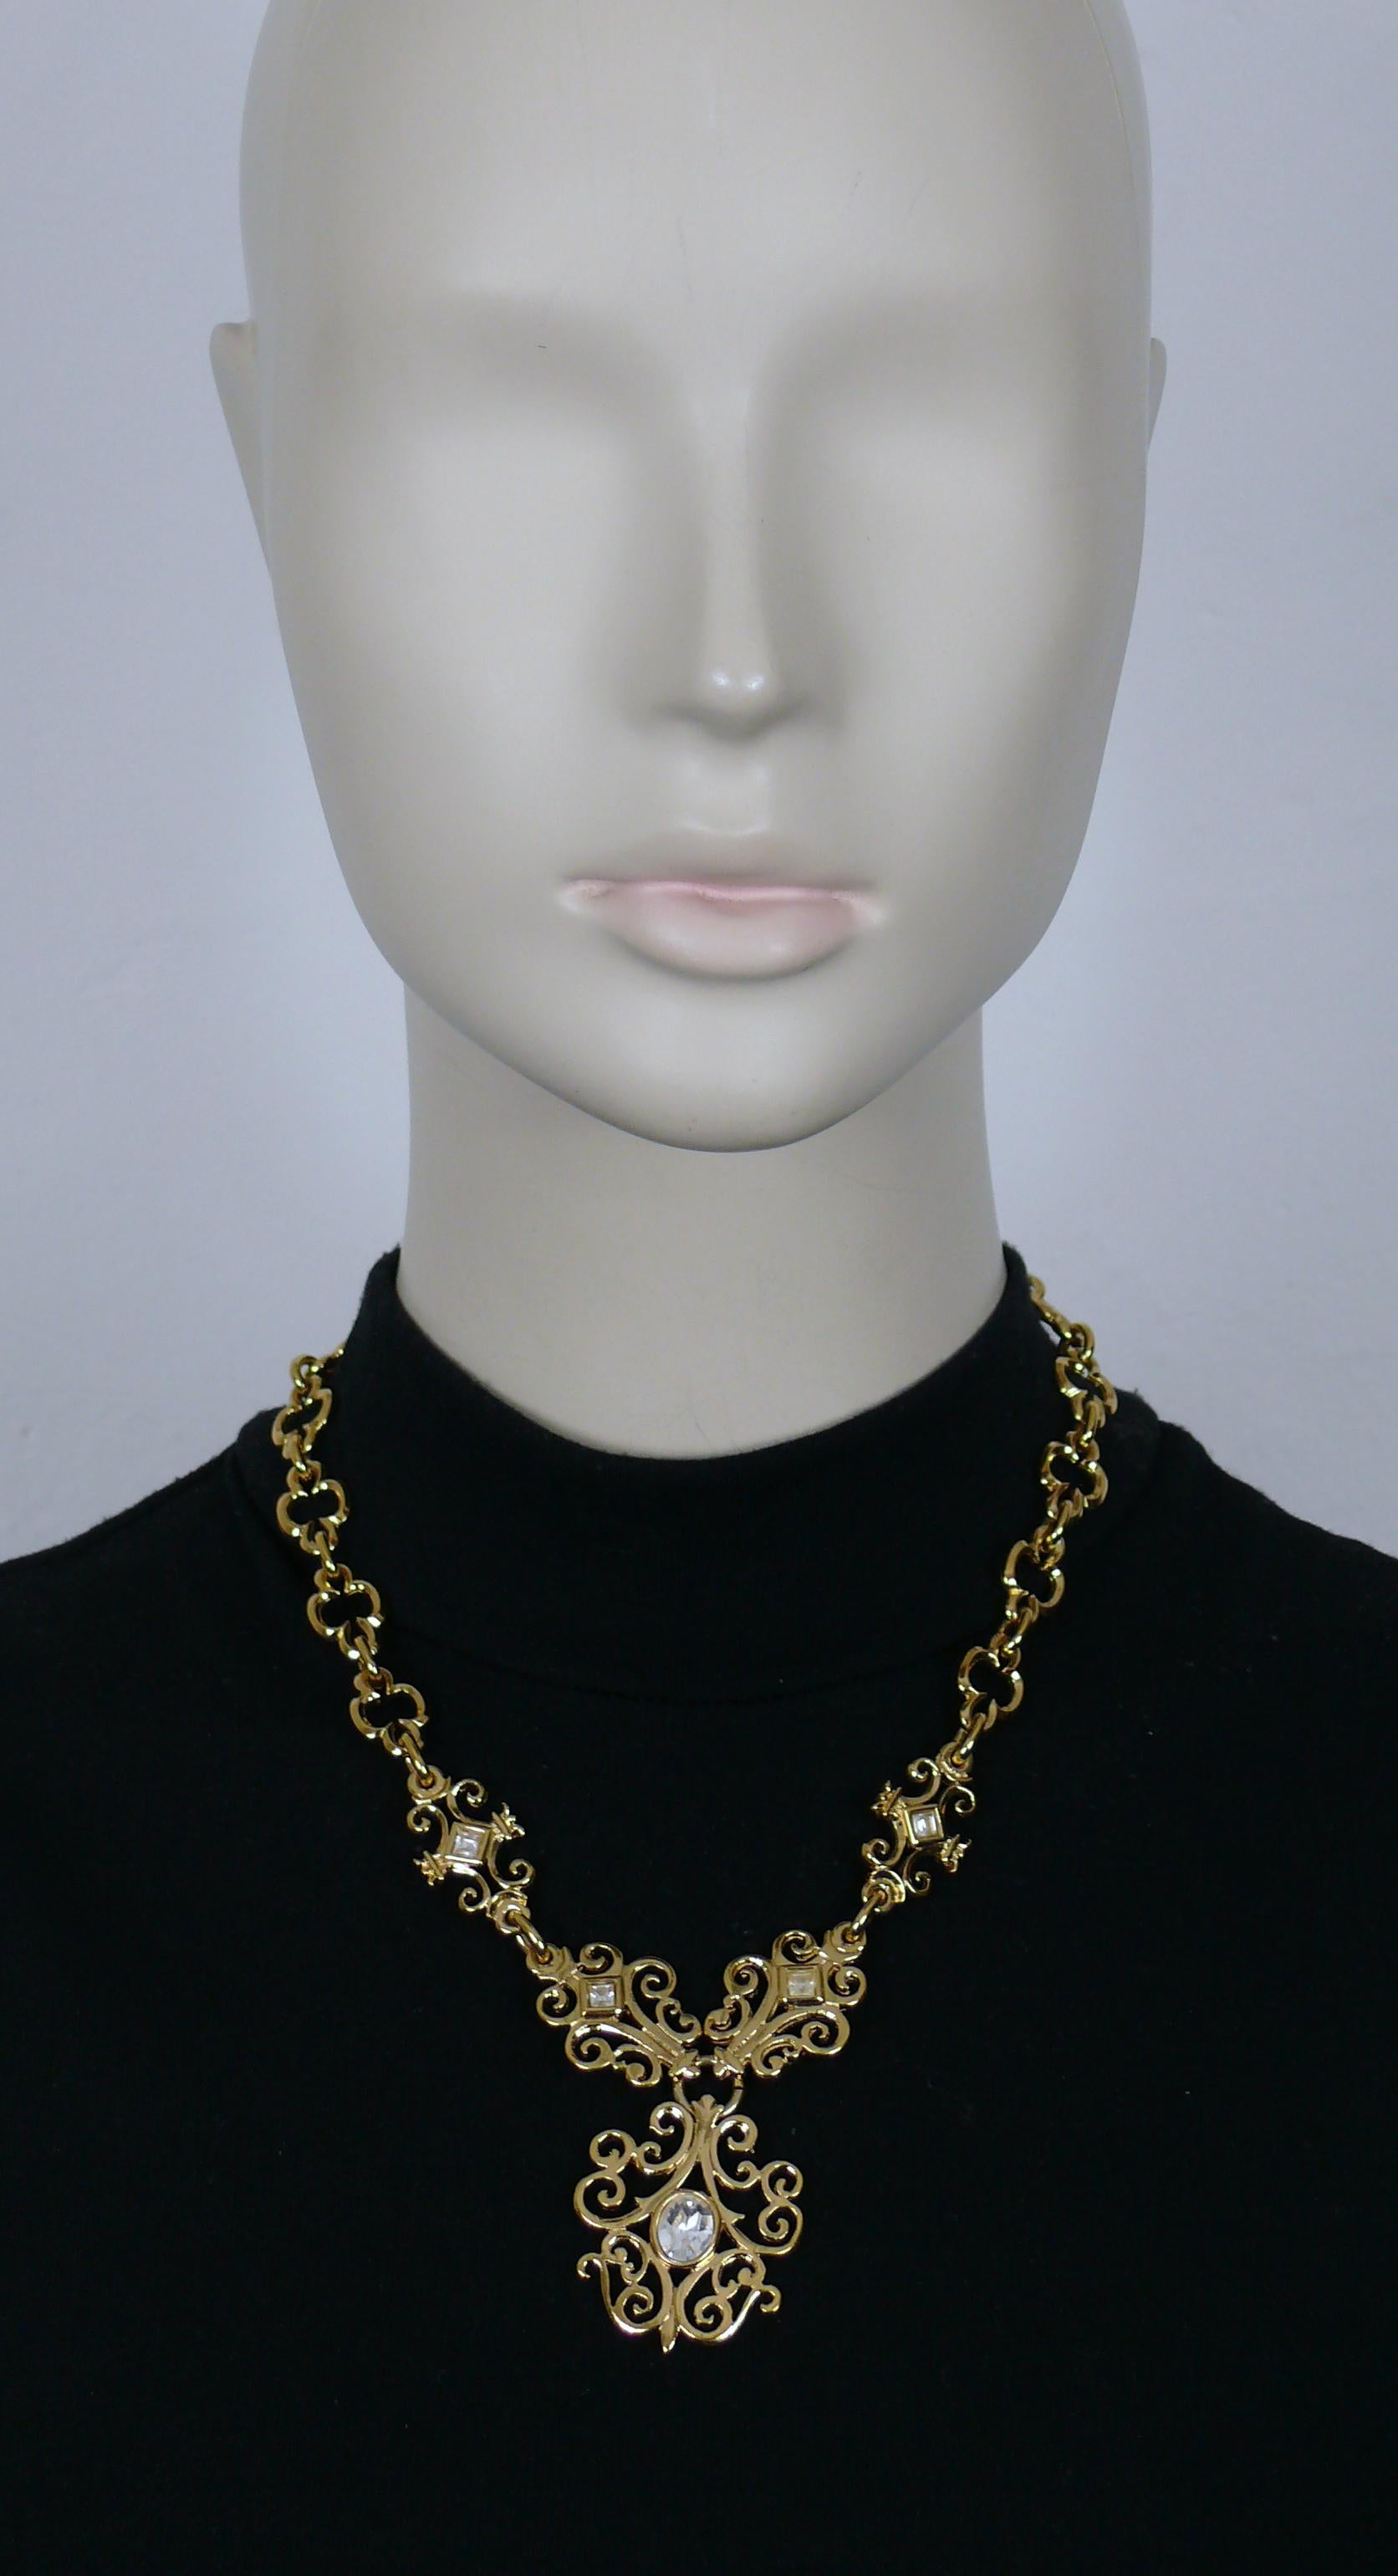 YVES SAINT LAURENT vintage gold tone link necklace embellished with clear crystals.

Adjustable S-hook clasp.

Embossed YSL Made in France.

Indicative measurements : adjustable length from approx. 42 cm (16.54 inches) to approx. 50 cm (19.69